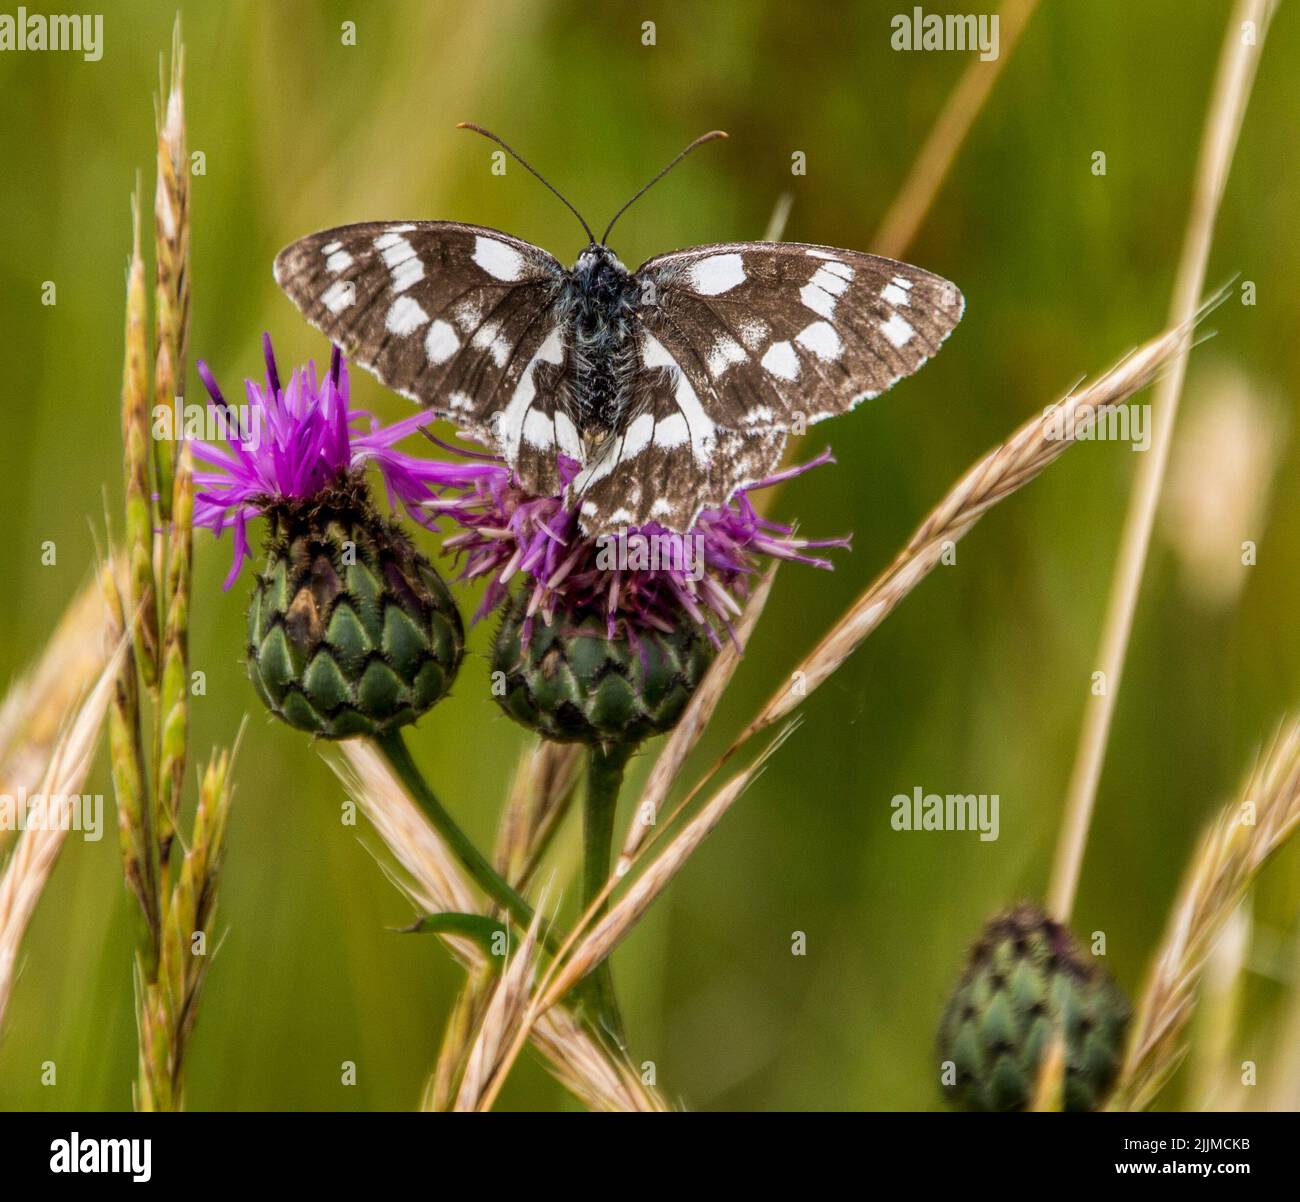 A shallow focus of a Marbled white butterfly on Knapweeds buds with blurred green background Stock Photo